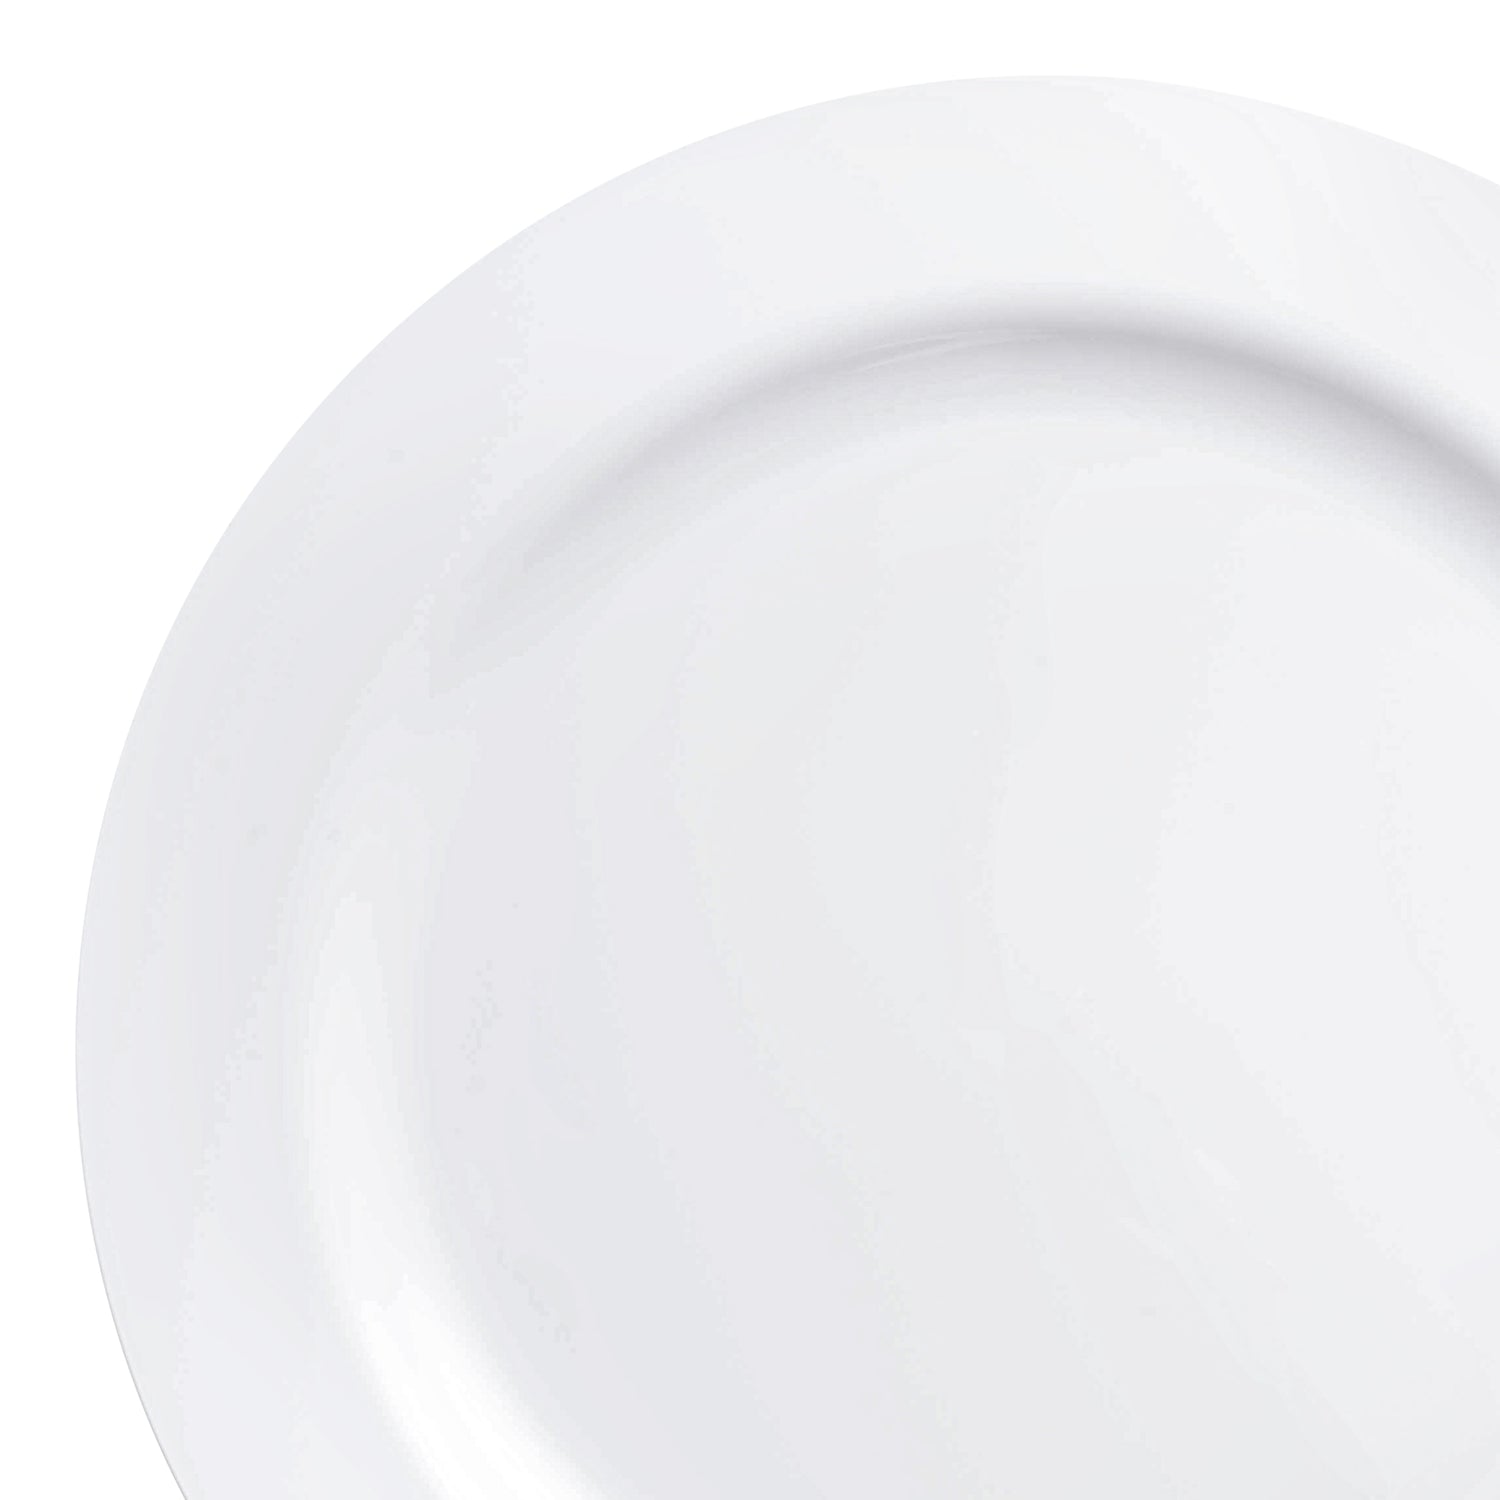 Solid White Economy Round Disposable Plastic Appetizer/Salad Plates (7.5") | The Kaya Collection